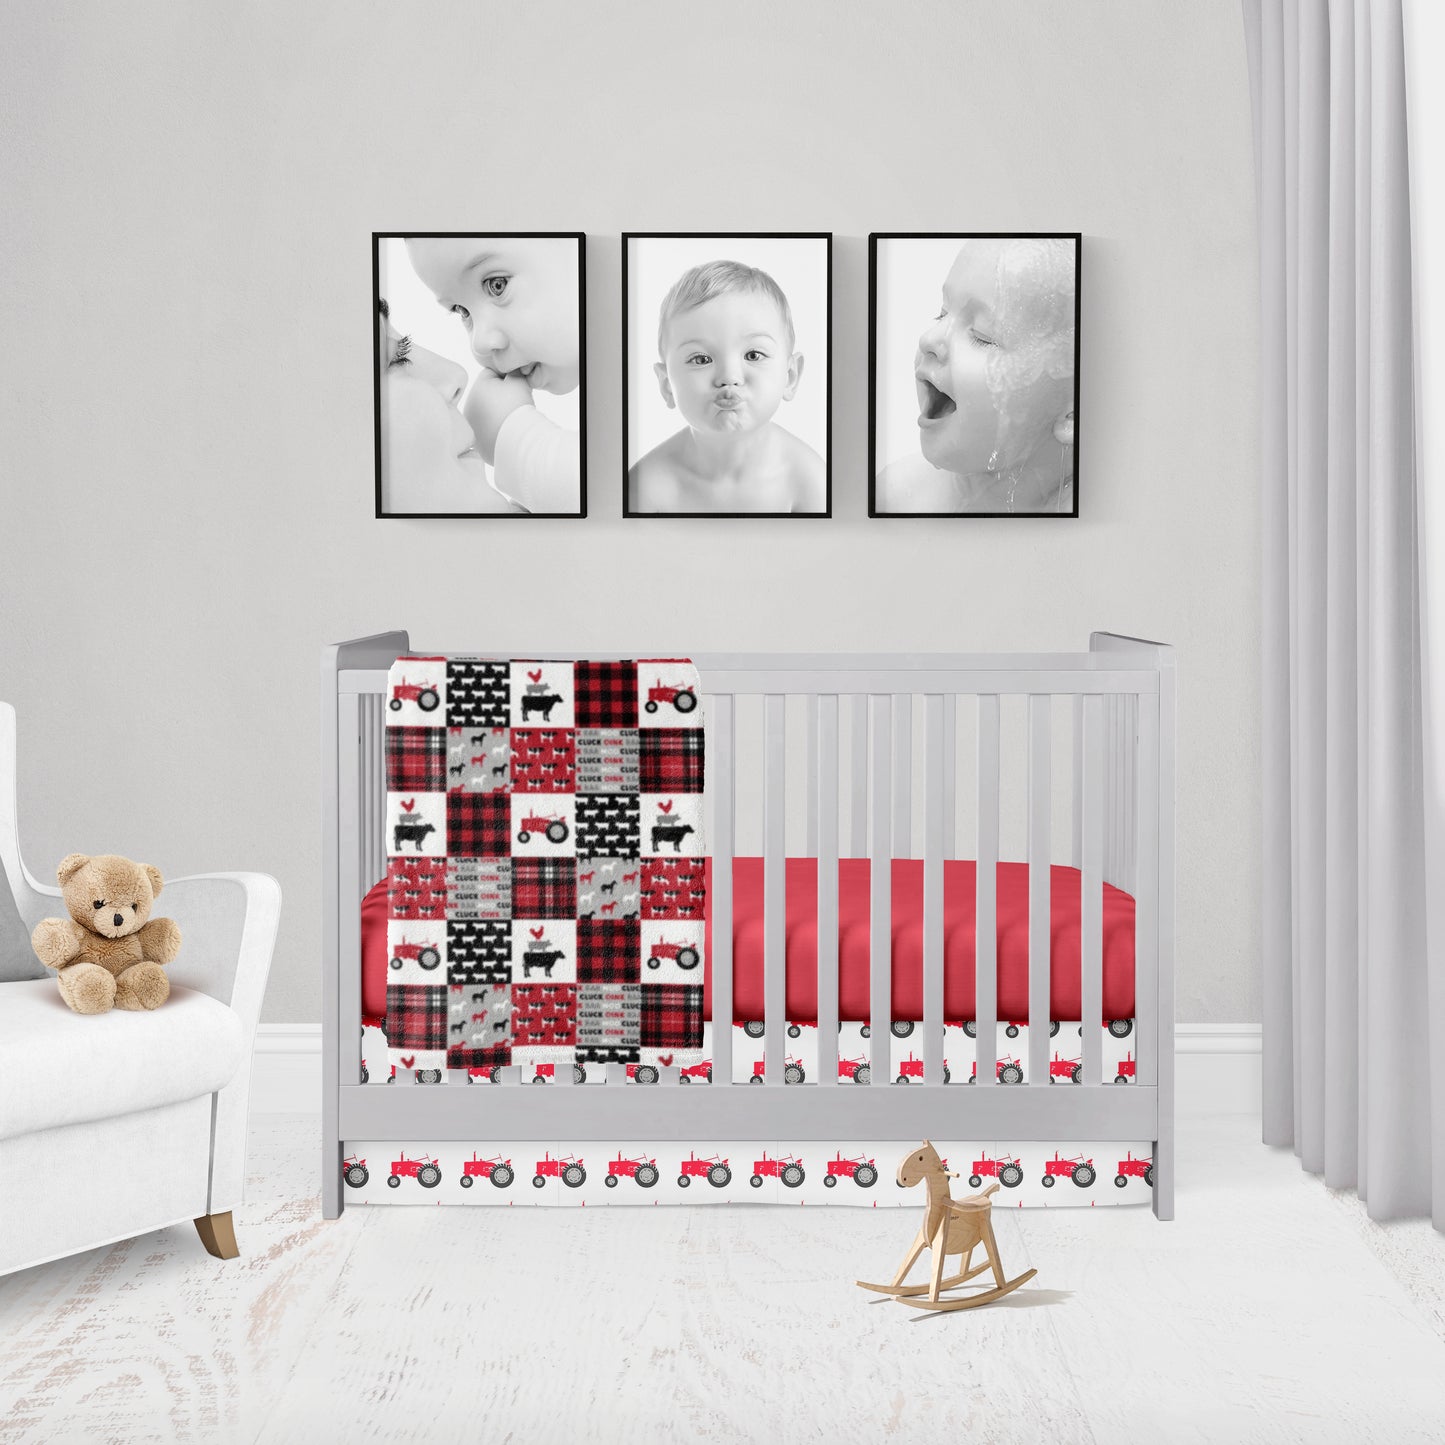 red tractor bedding, red sheet, red tractors on a white background crib skirt and a red tractor/farm faux minky quilt